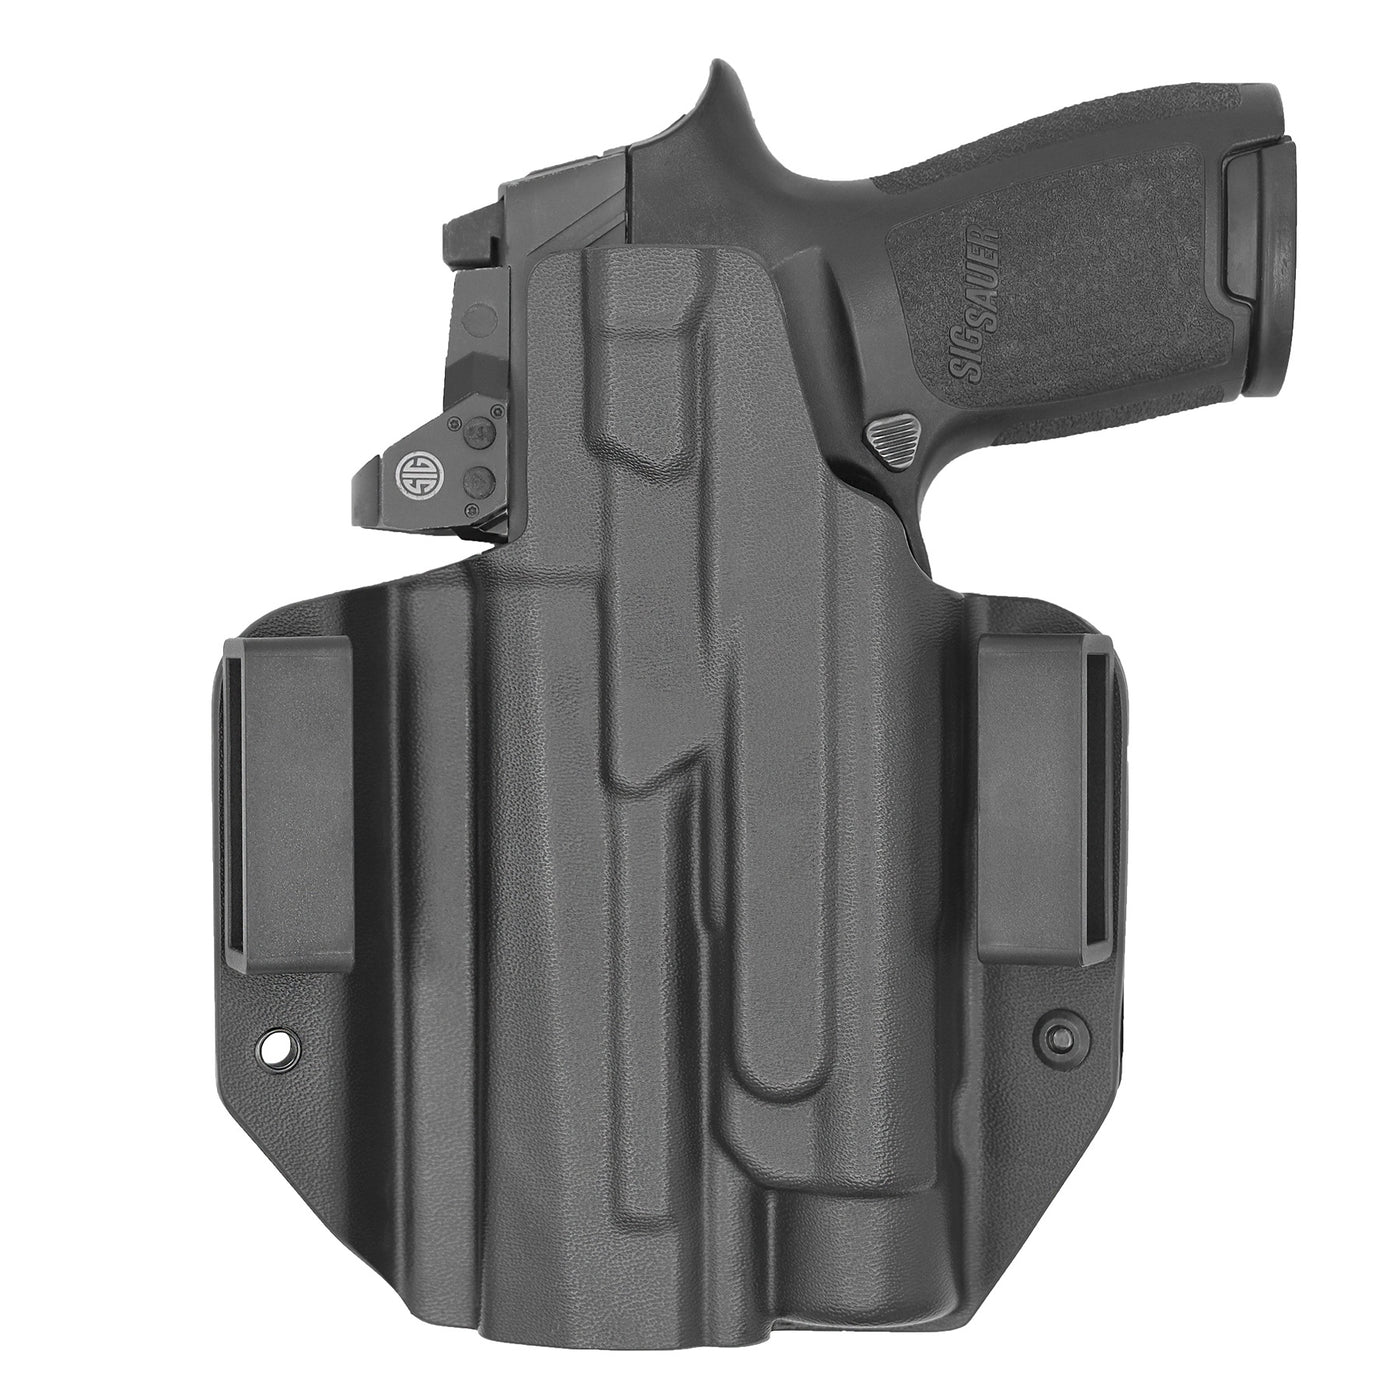 C&G Holsters custom OWB Tactical FNX45T Streamlight TLR-1 in holstered position back view